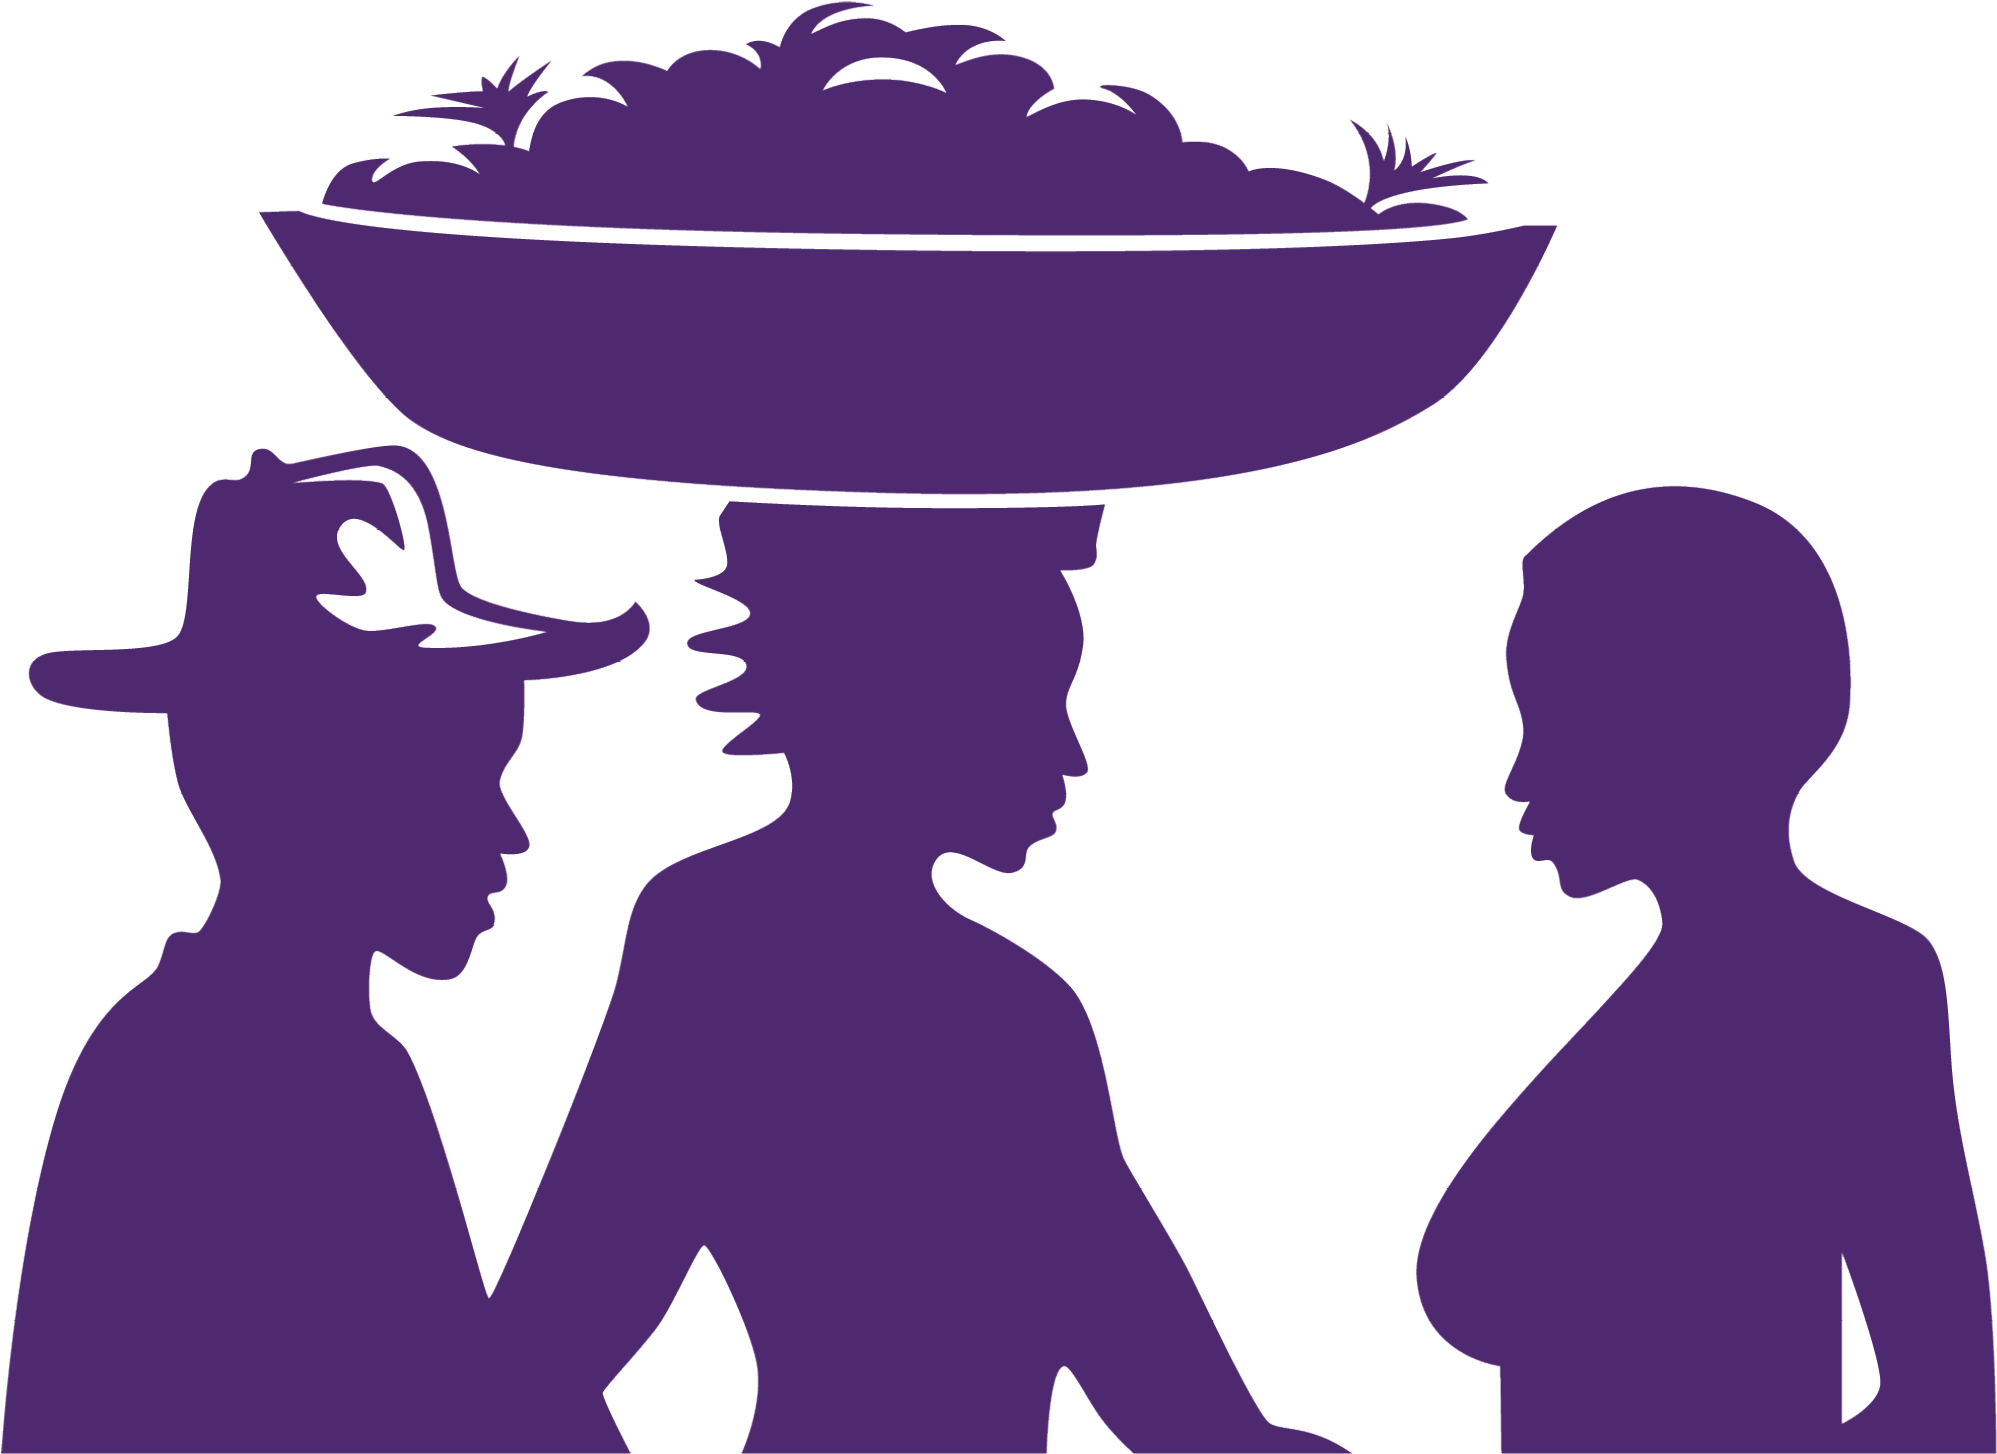 Silhouettes Of Women With A Bowl On Their Head